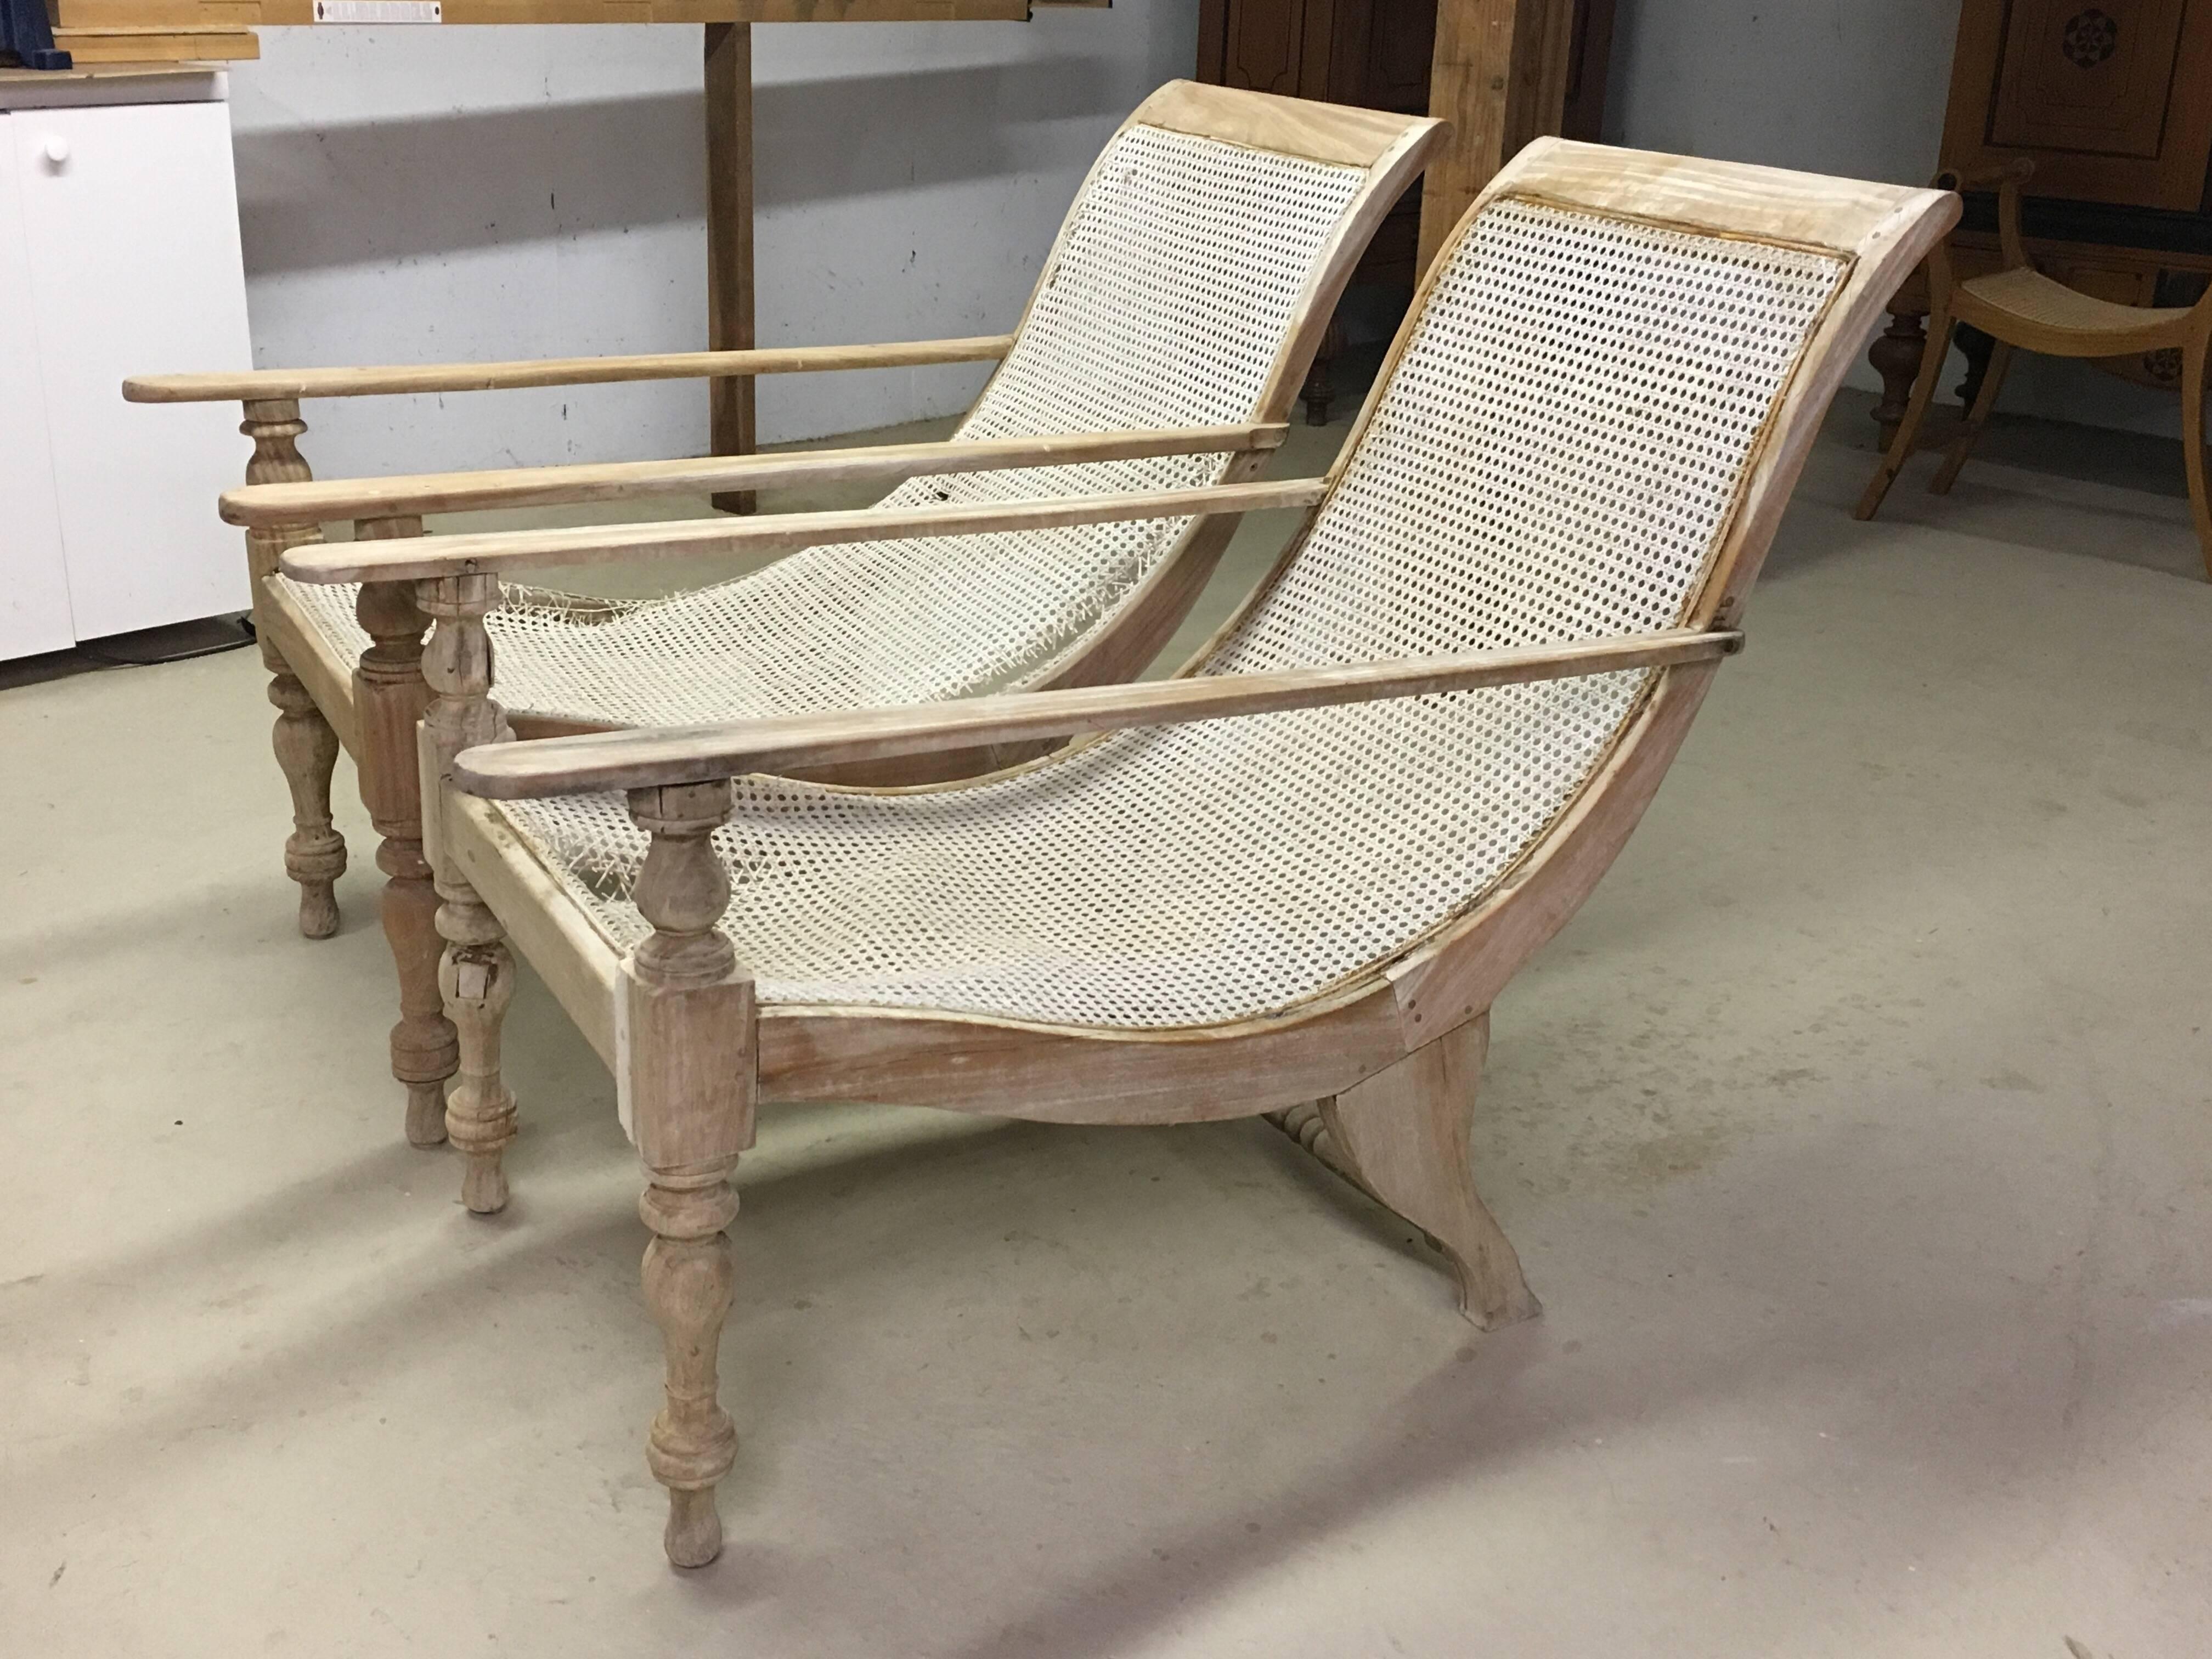 Pair of Dutch Colonial Solid Satinwood Caned Sling Back Planters Chairs, c. 1850
Bleached Solid Satinwood with new caning.  Can be used for outdoor use.  Some photos show the chairs before re-caning.  They were recently re-caned and are in excellent